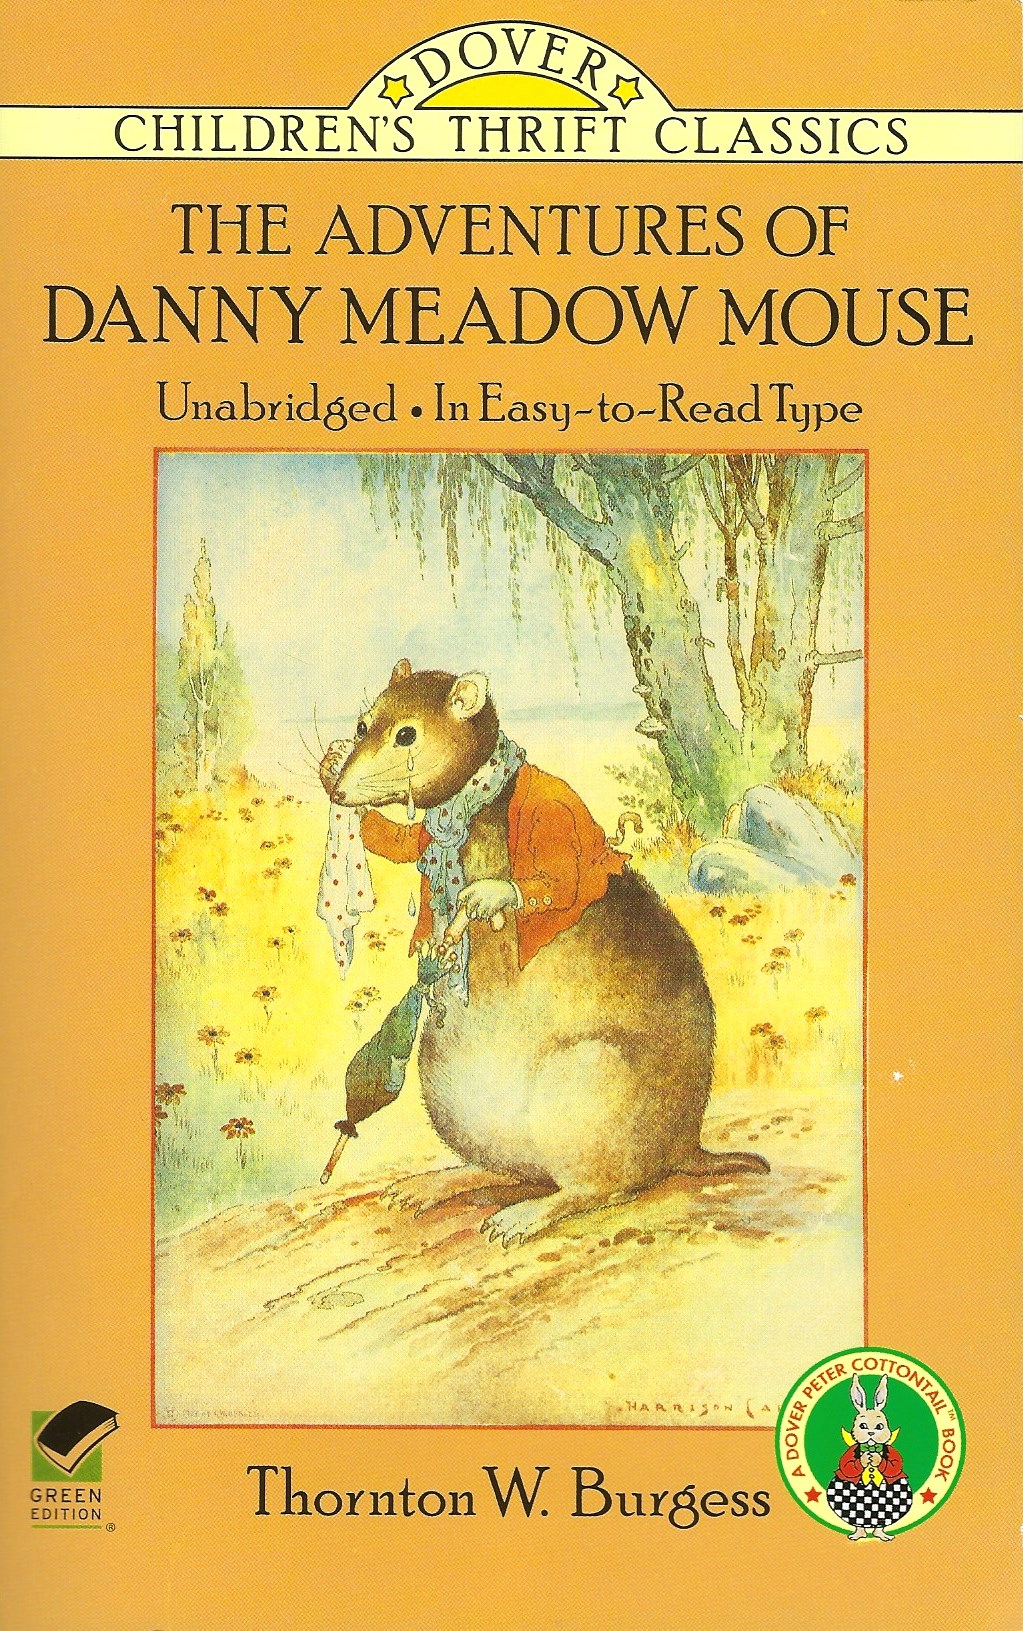 DANNY MEADOW MOUSE Thornton W. Burgess